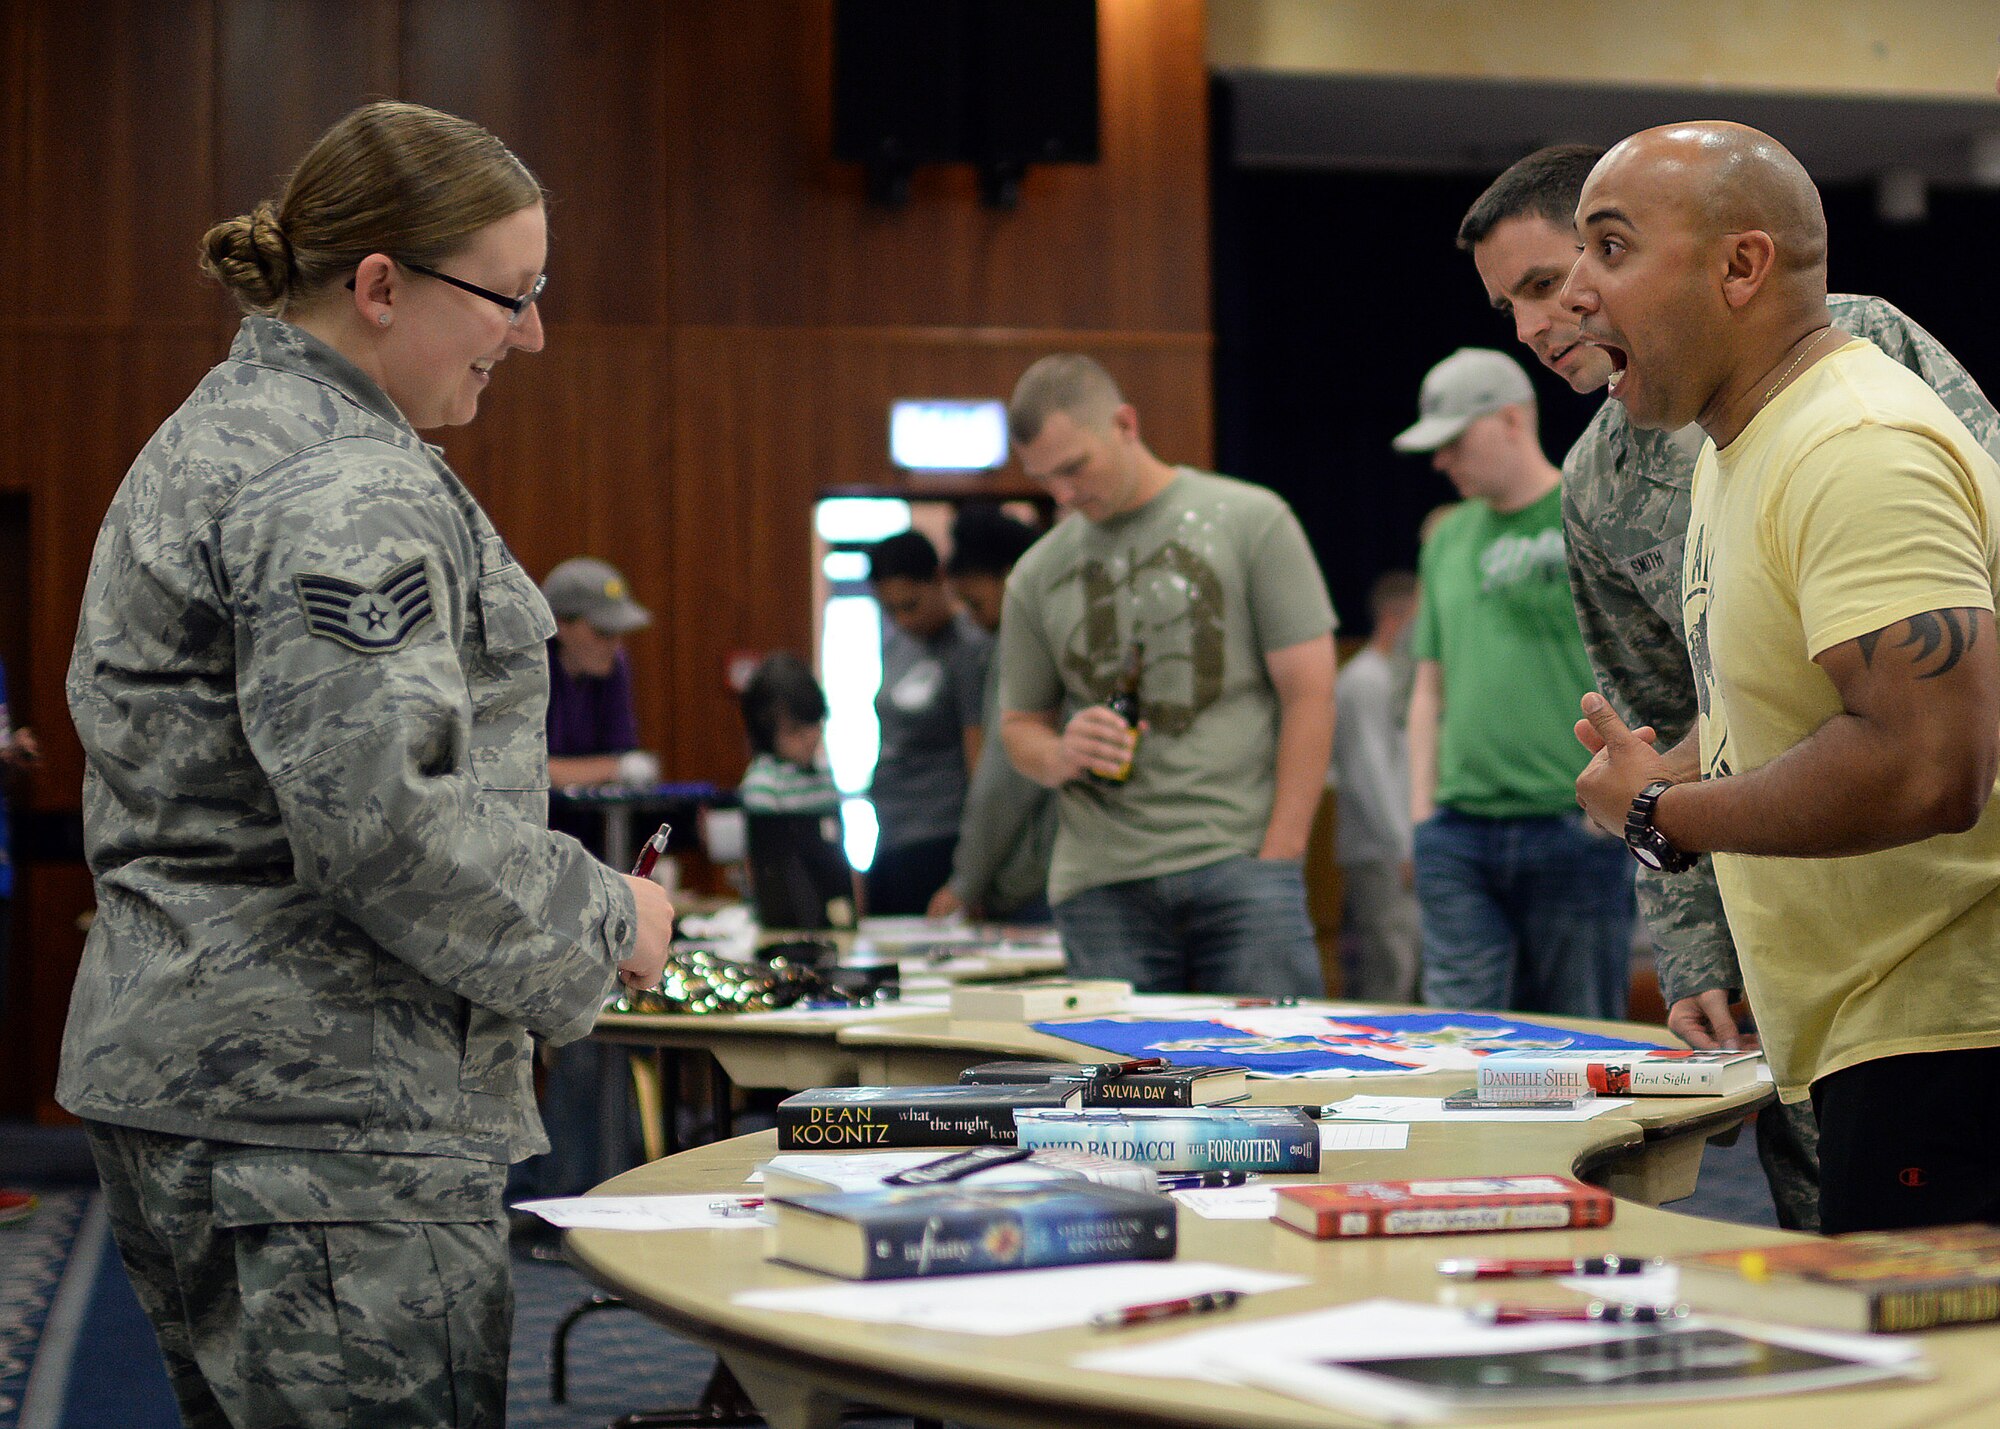 U.S. Air Force Staff Sgt. Sara Howard, 52nd Comptroller Squadron and Rathdrum, Idaho, native bargains with U.S. Air Force Master Sgt. Jason Garo, 52nd Operations Support Squadron first sergeant, over an autographed novel by horror and suspense writer Dean Koontz during a silent auction in Club Eifel at Spangdahlem Air Base, Germany, May 30, 2014. Nearly 250 items were up for bid at the event, and the all the proceeds went to the Fisher House Foundation and Operation Warmheart. (U.S. Air Force photo by Staff Sgt. Daryl Knee/Released)